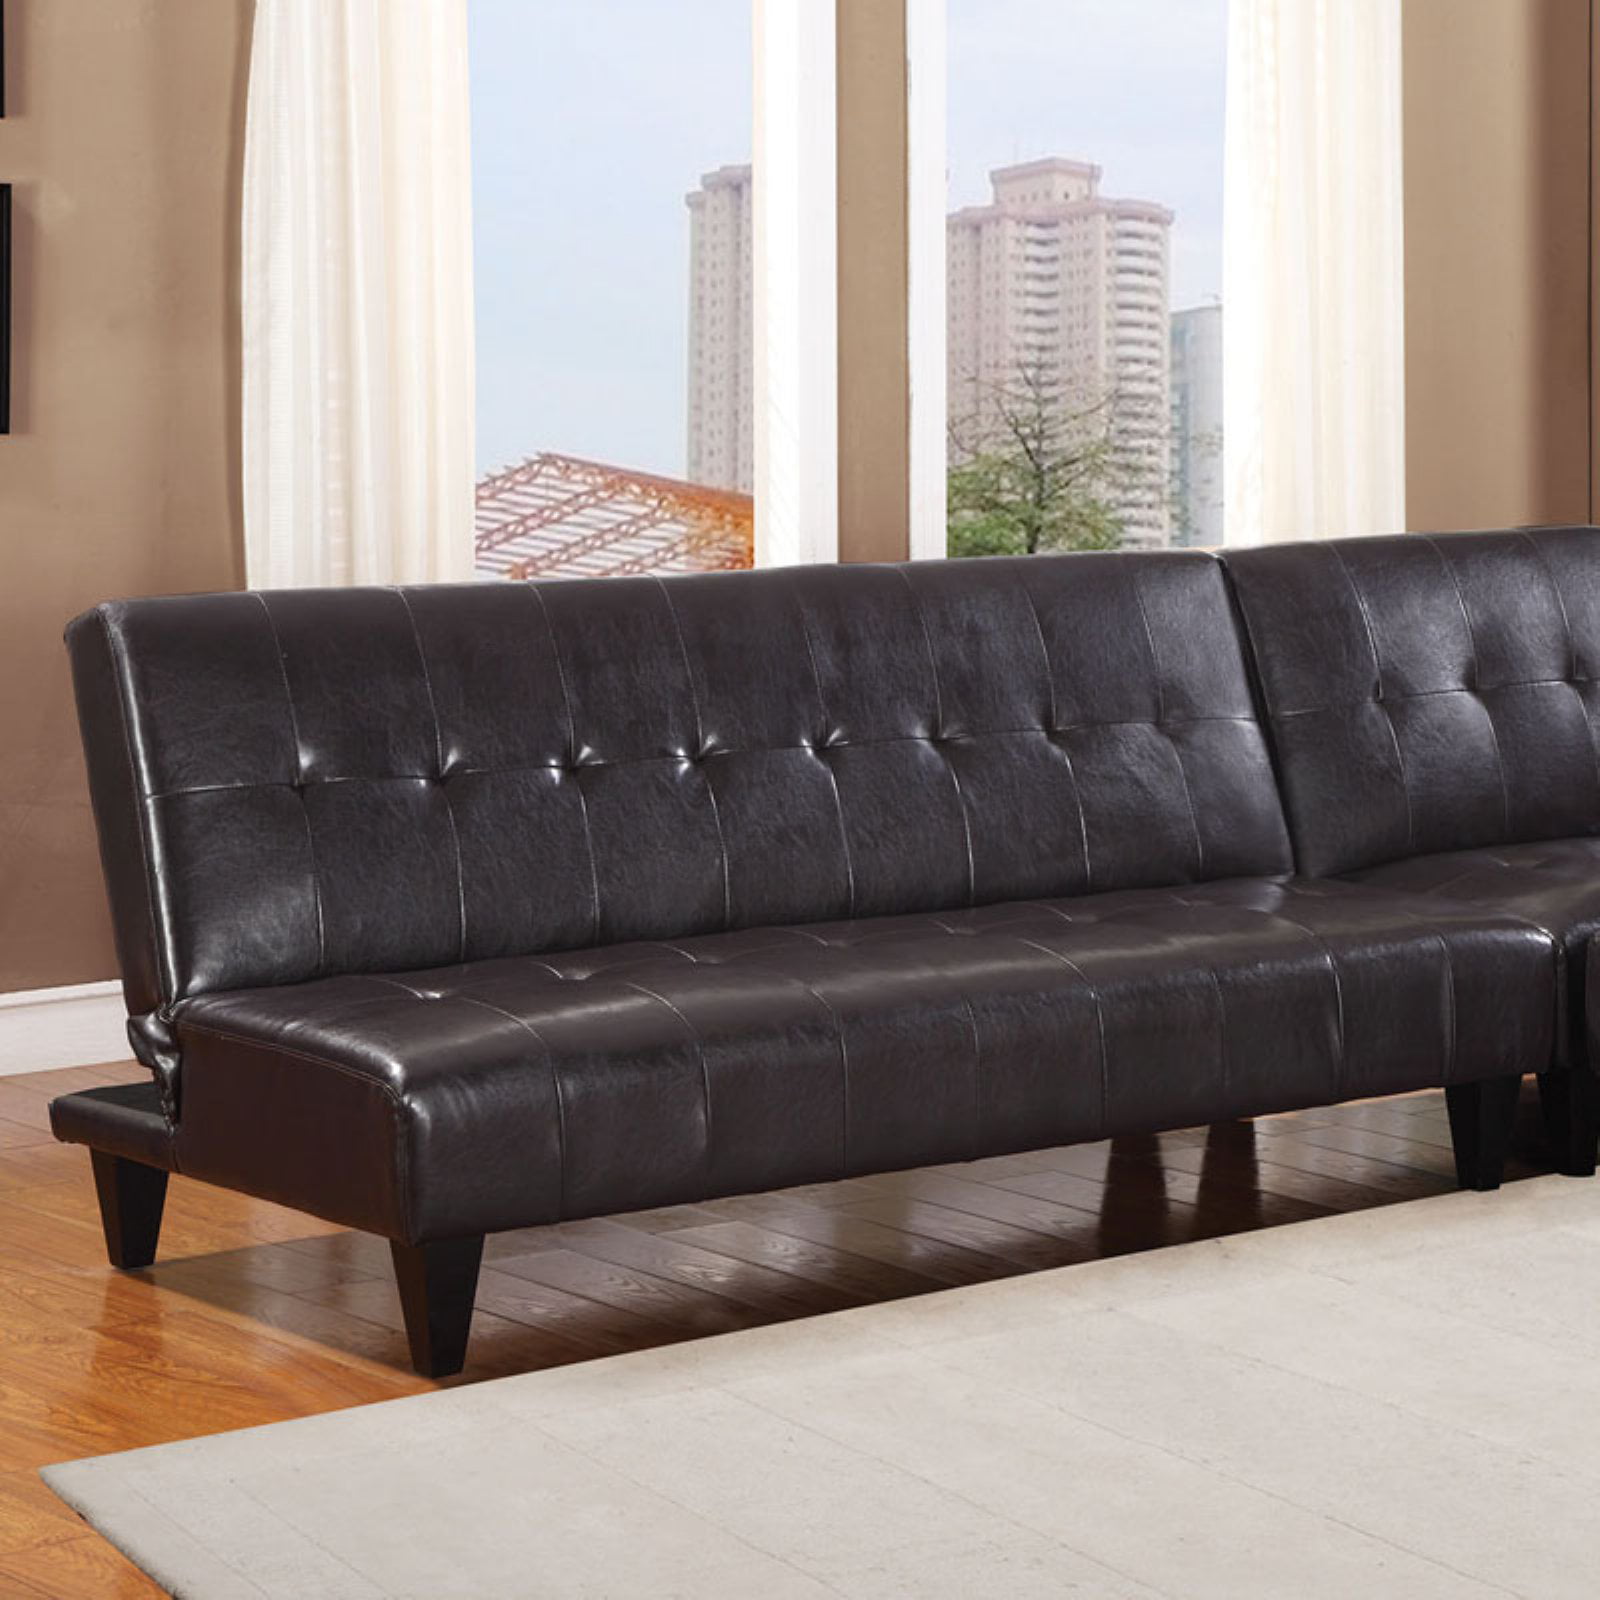 Faux Leather Bycast Adjustable Futon, Real Leather Futon